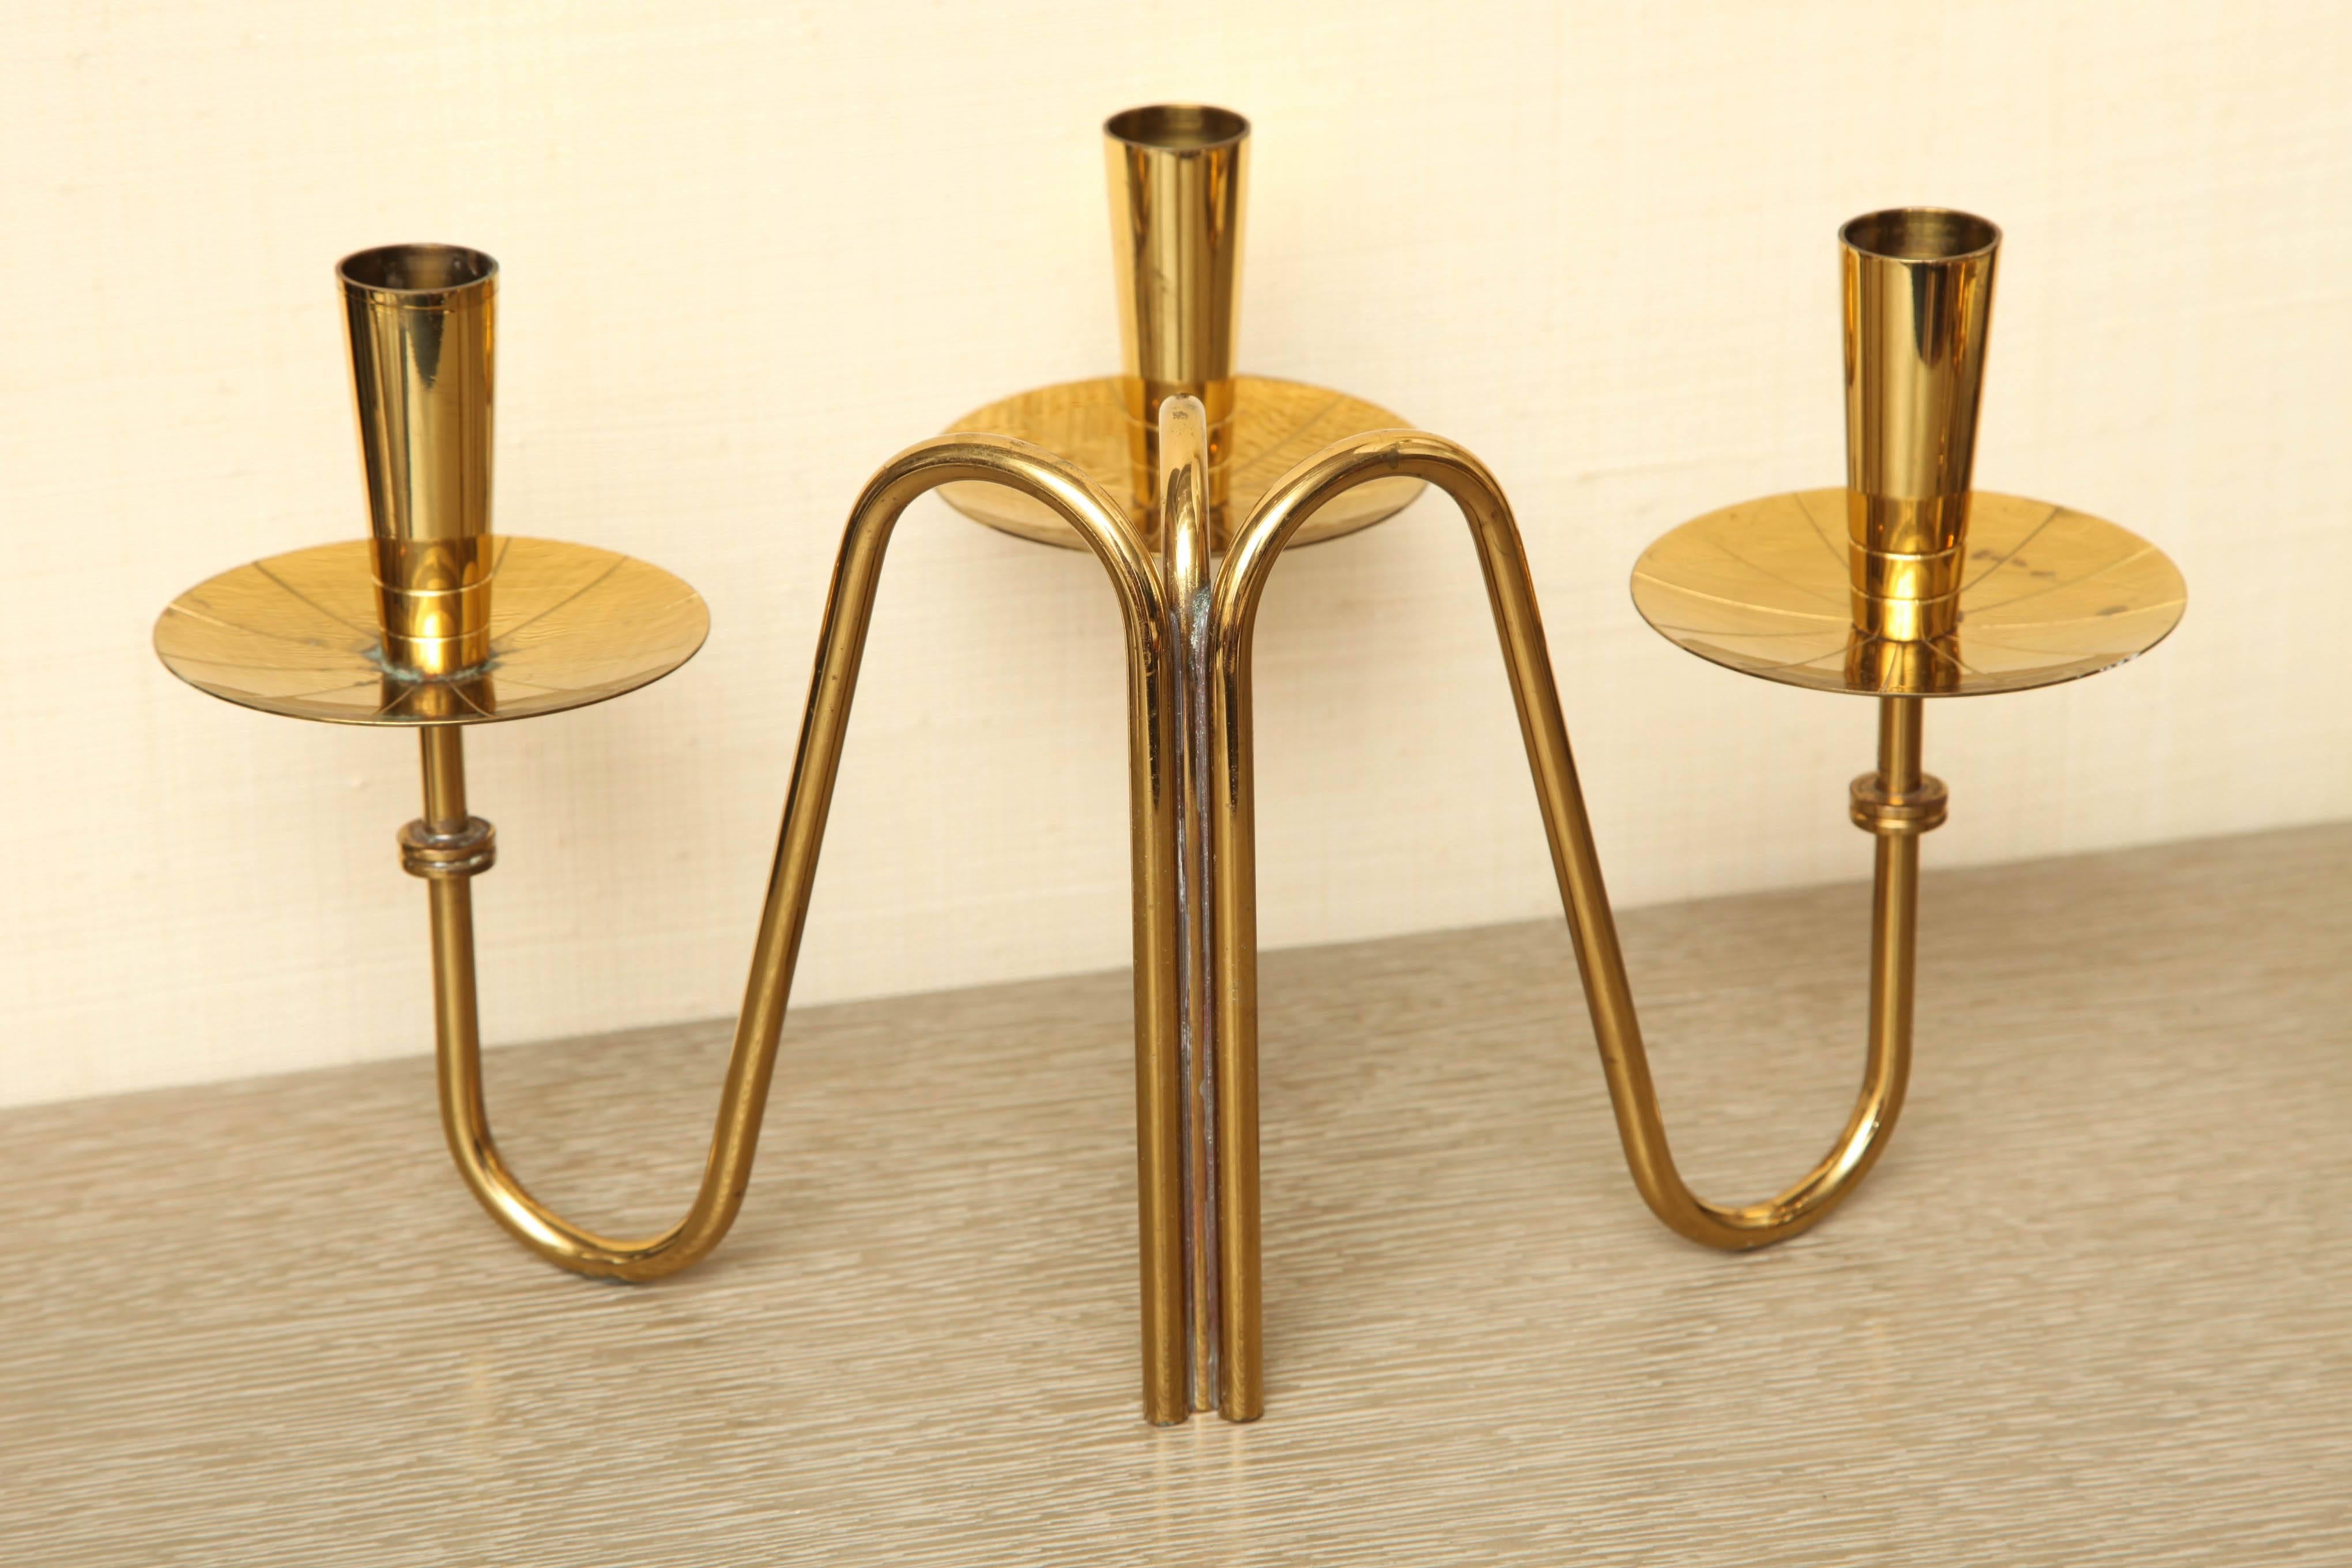 Pair of Brass Candle Holders by Tommi Parzinger, circa 1960 For Sale 2